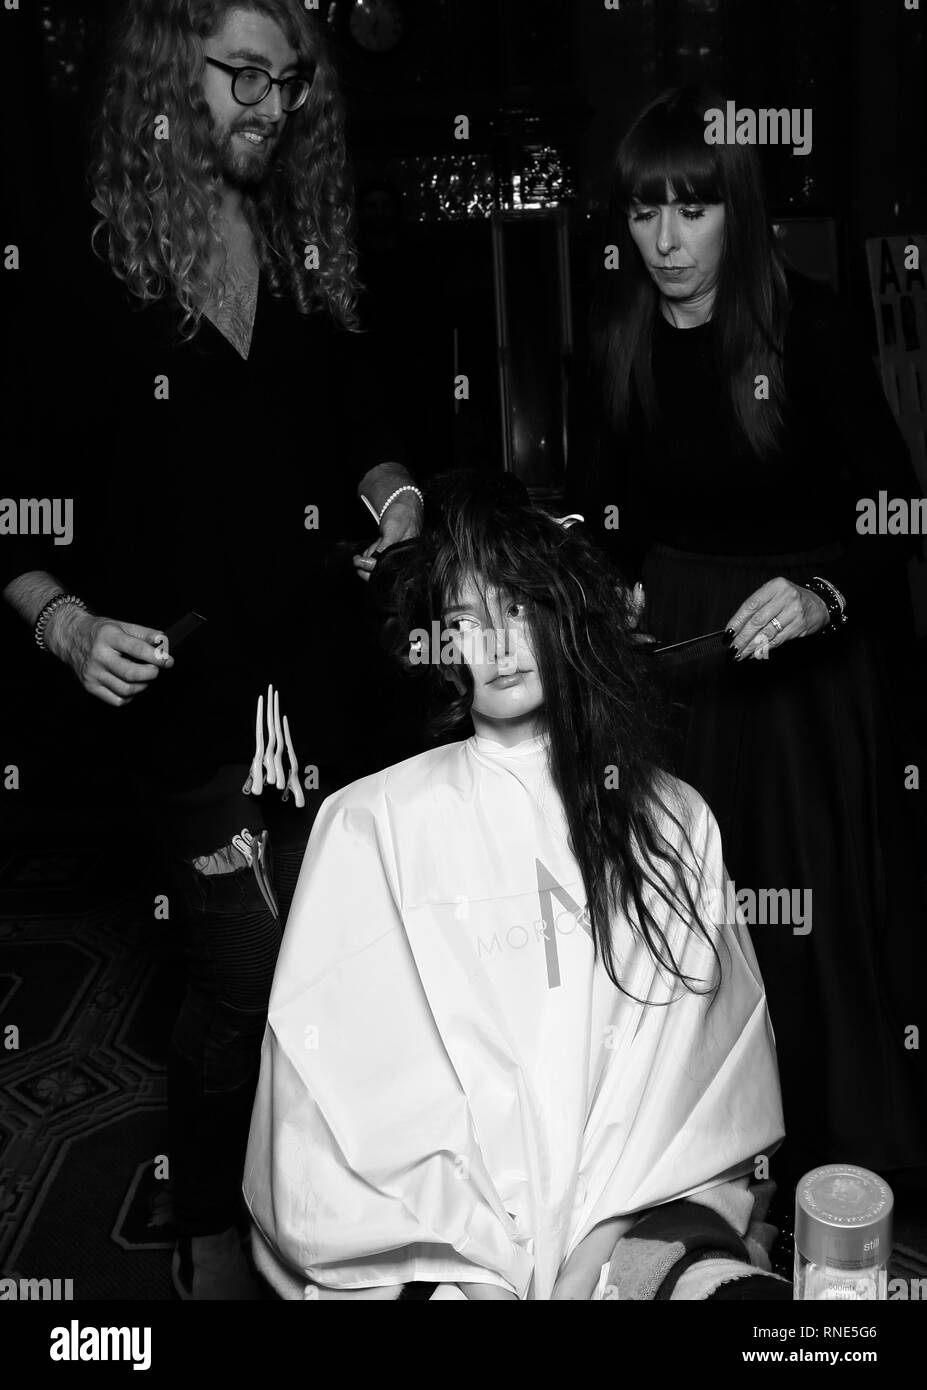 London, UK. 17th Feb, 2019. A model in hair and make up backstage ahead of the Kristian Aadnevik show during London Fashion Week Autumn/Winter 2019 on February 17, 2019 in London, United Kingdom. Photo by Paul Cunningham Credit: Paul Cunningham/Alamy Live News Credit: Paul Cunningham/Alamy Live News Stock Photo